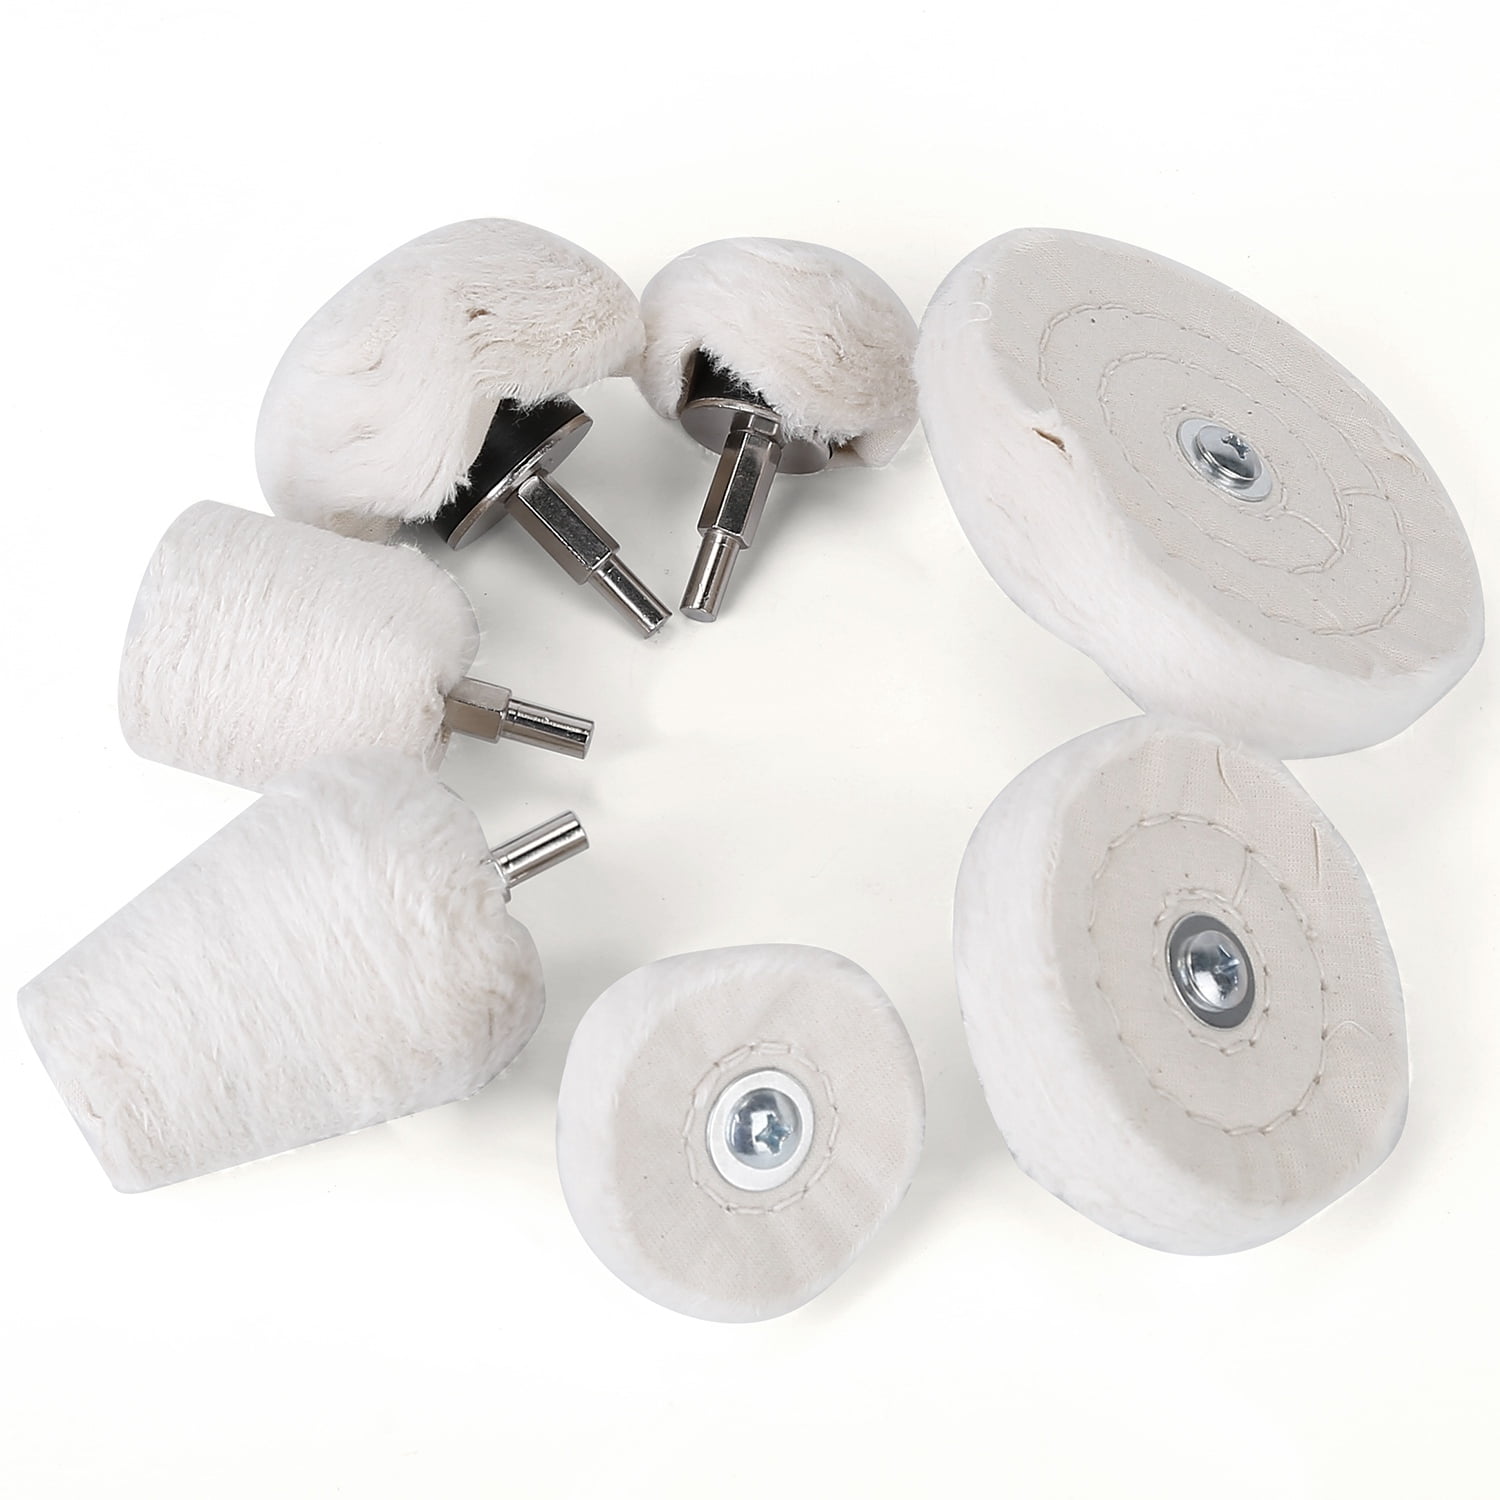 7pc Buffing Wheel Kit Metal Chrome Cleaning Polishing Head Compound Fits  Drill